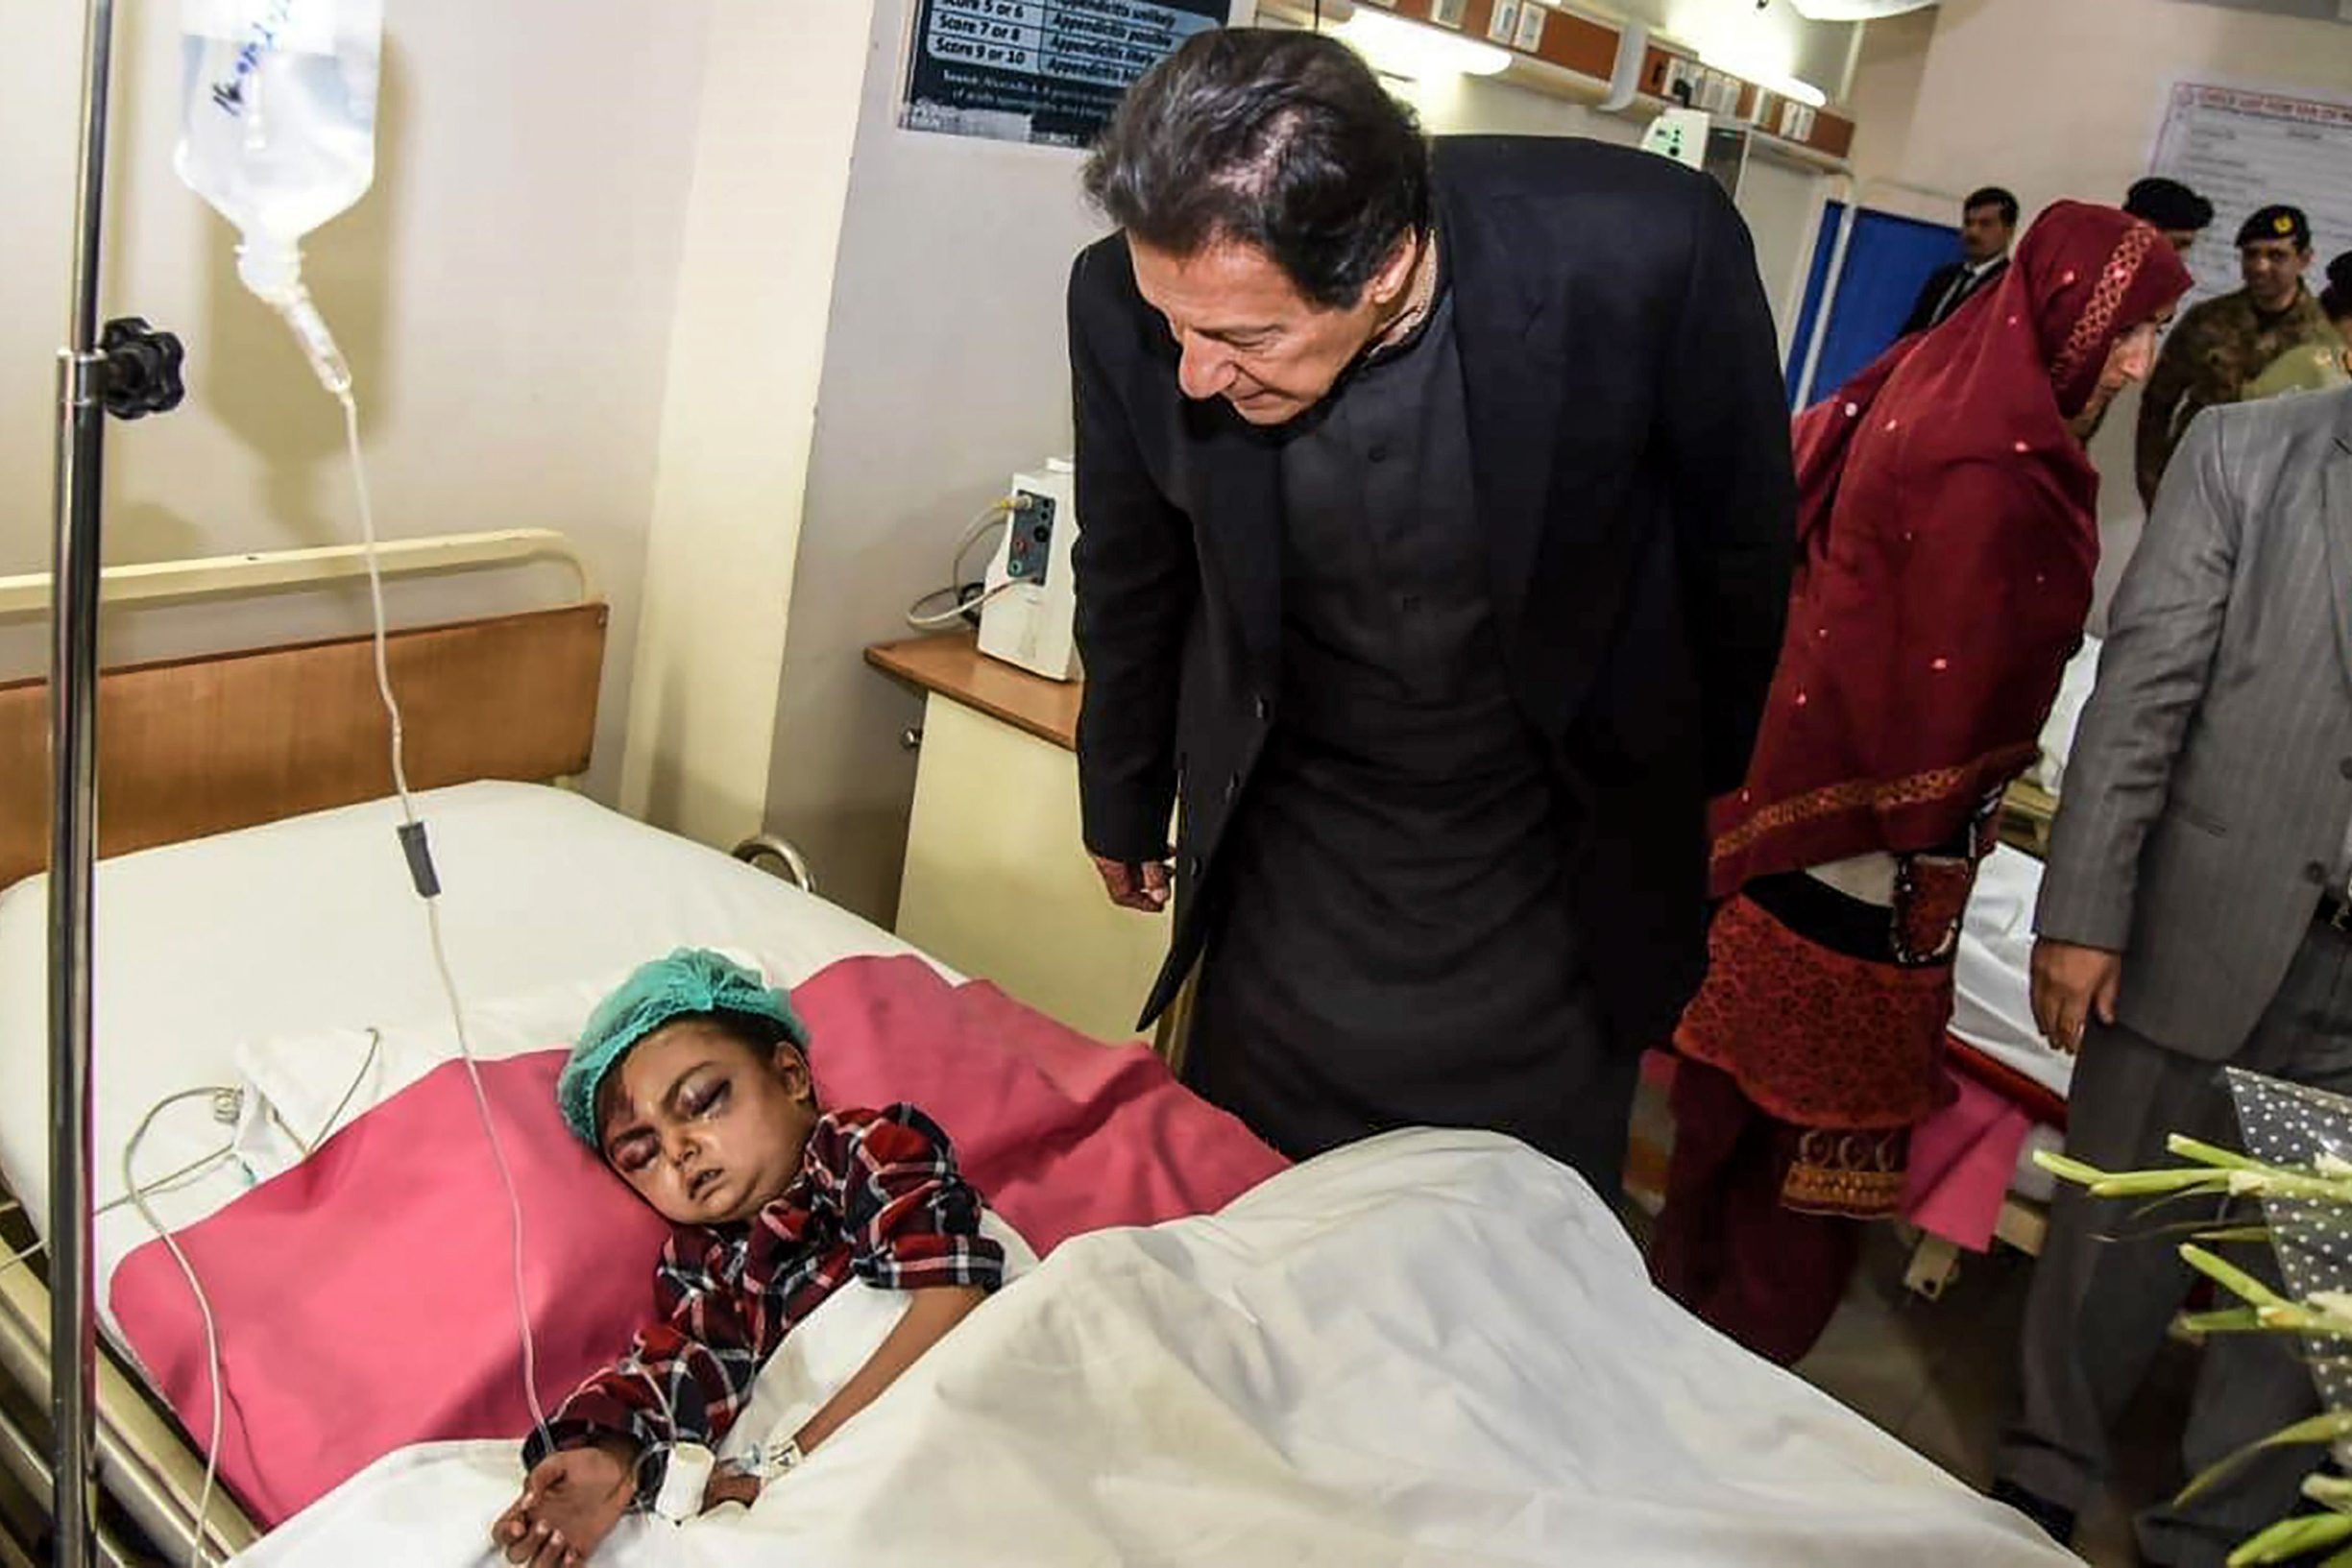 In this handout photograph taken and released by the Pakistan Press Information Department (PID) on January 15, 2020, Pakistan's Prime Minister Imran Khan (C) looks at a young injured avalanche victim at a military hospital in Muzaffarabad, the capital of Pakistan-administered Kashmir. - Avalanches, flooding and harsh winter weather killed more than 130 people across Pakistan and Afghanistan in recent days, leaving others stranded by heavy snowfall, officials said on January 14. (Photo by Handout / PID / AFP) / RESTRICTED TO EDITORIAL USE - MANDATORY CREDIT 